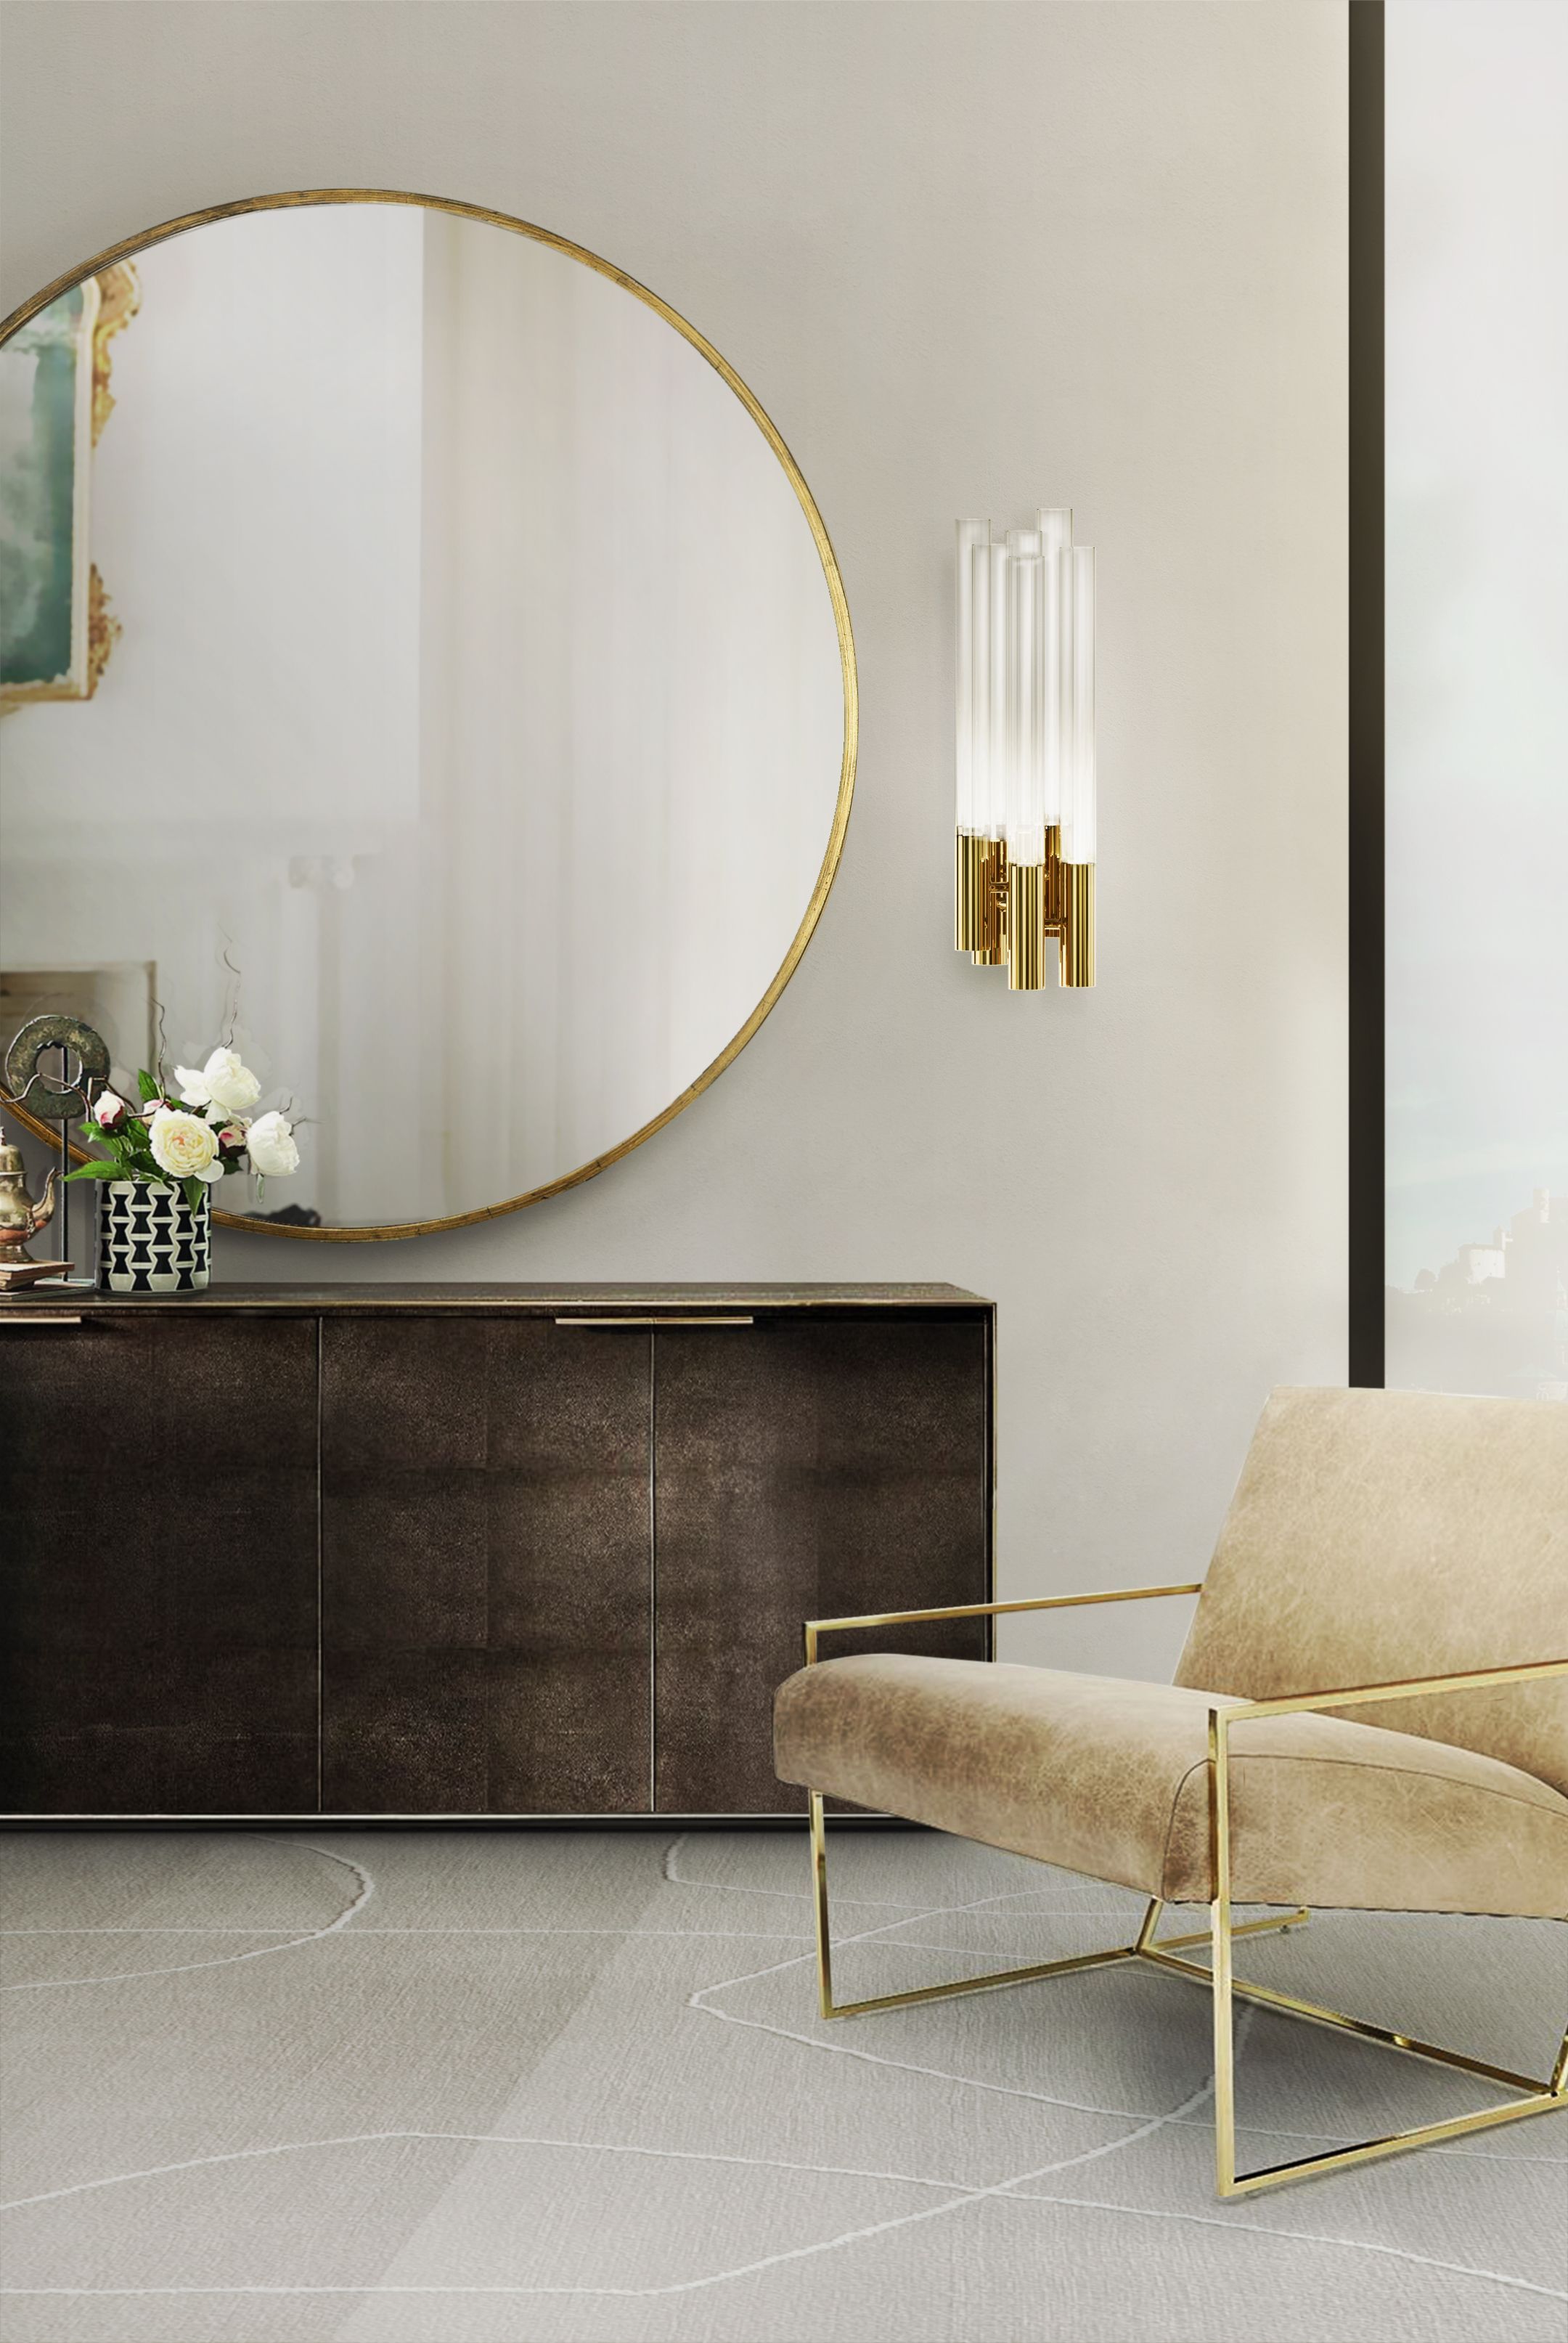 Create a glamorous decor with Luxxu’s wall lamps